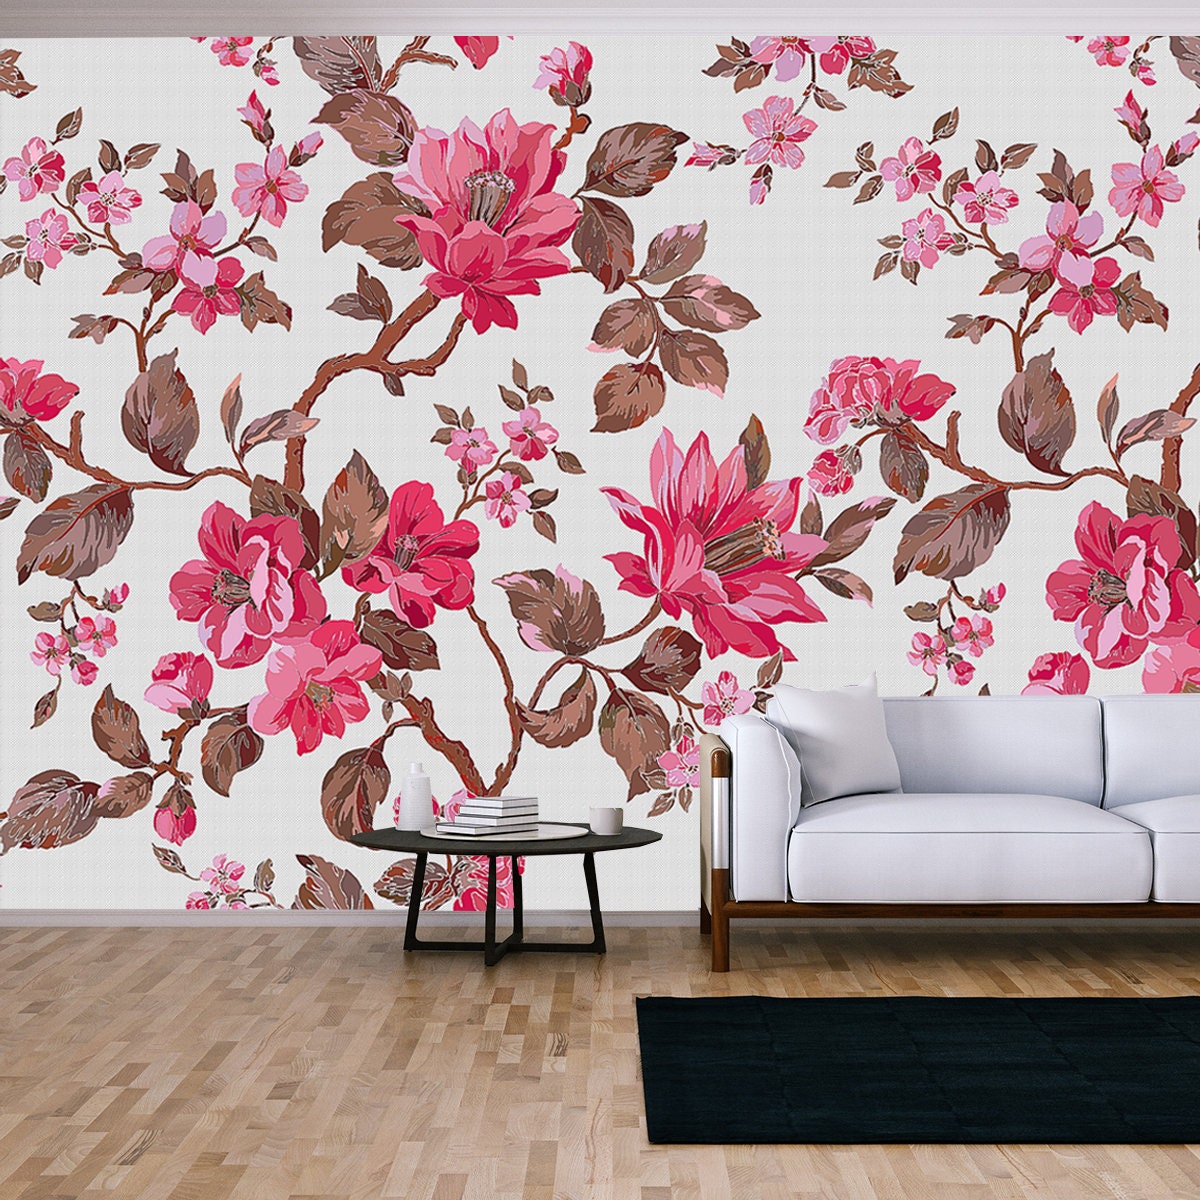 Pink Flowers with Branches on White Background Living Room Wallpaper Mural